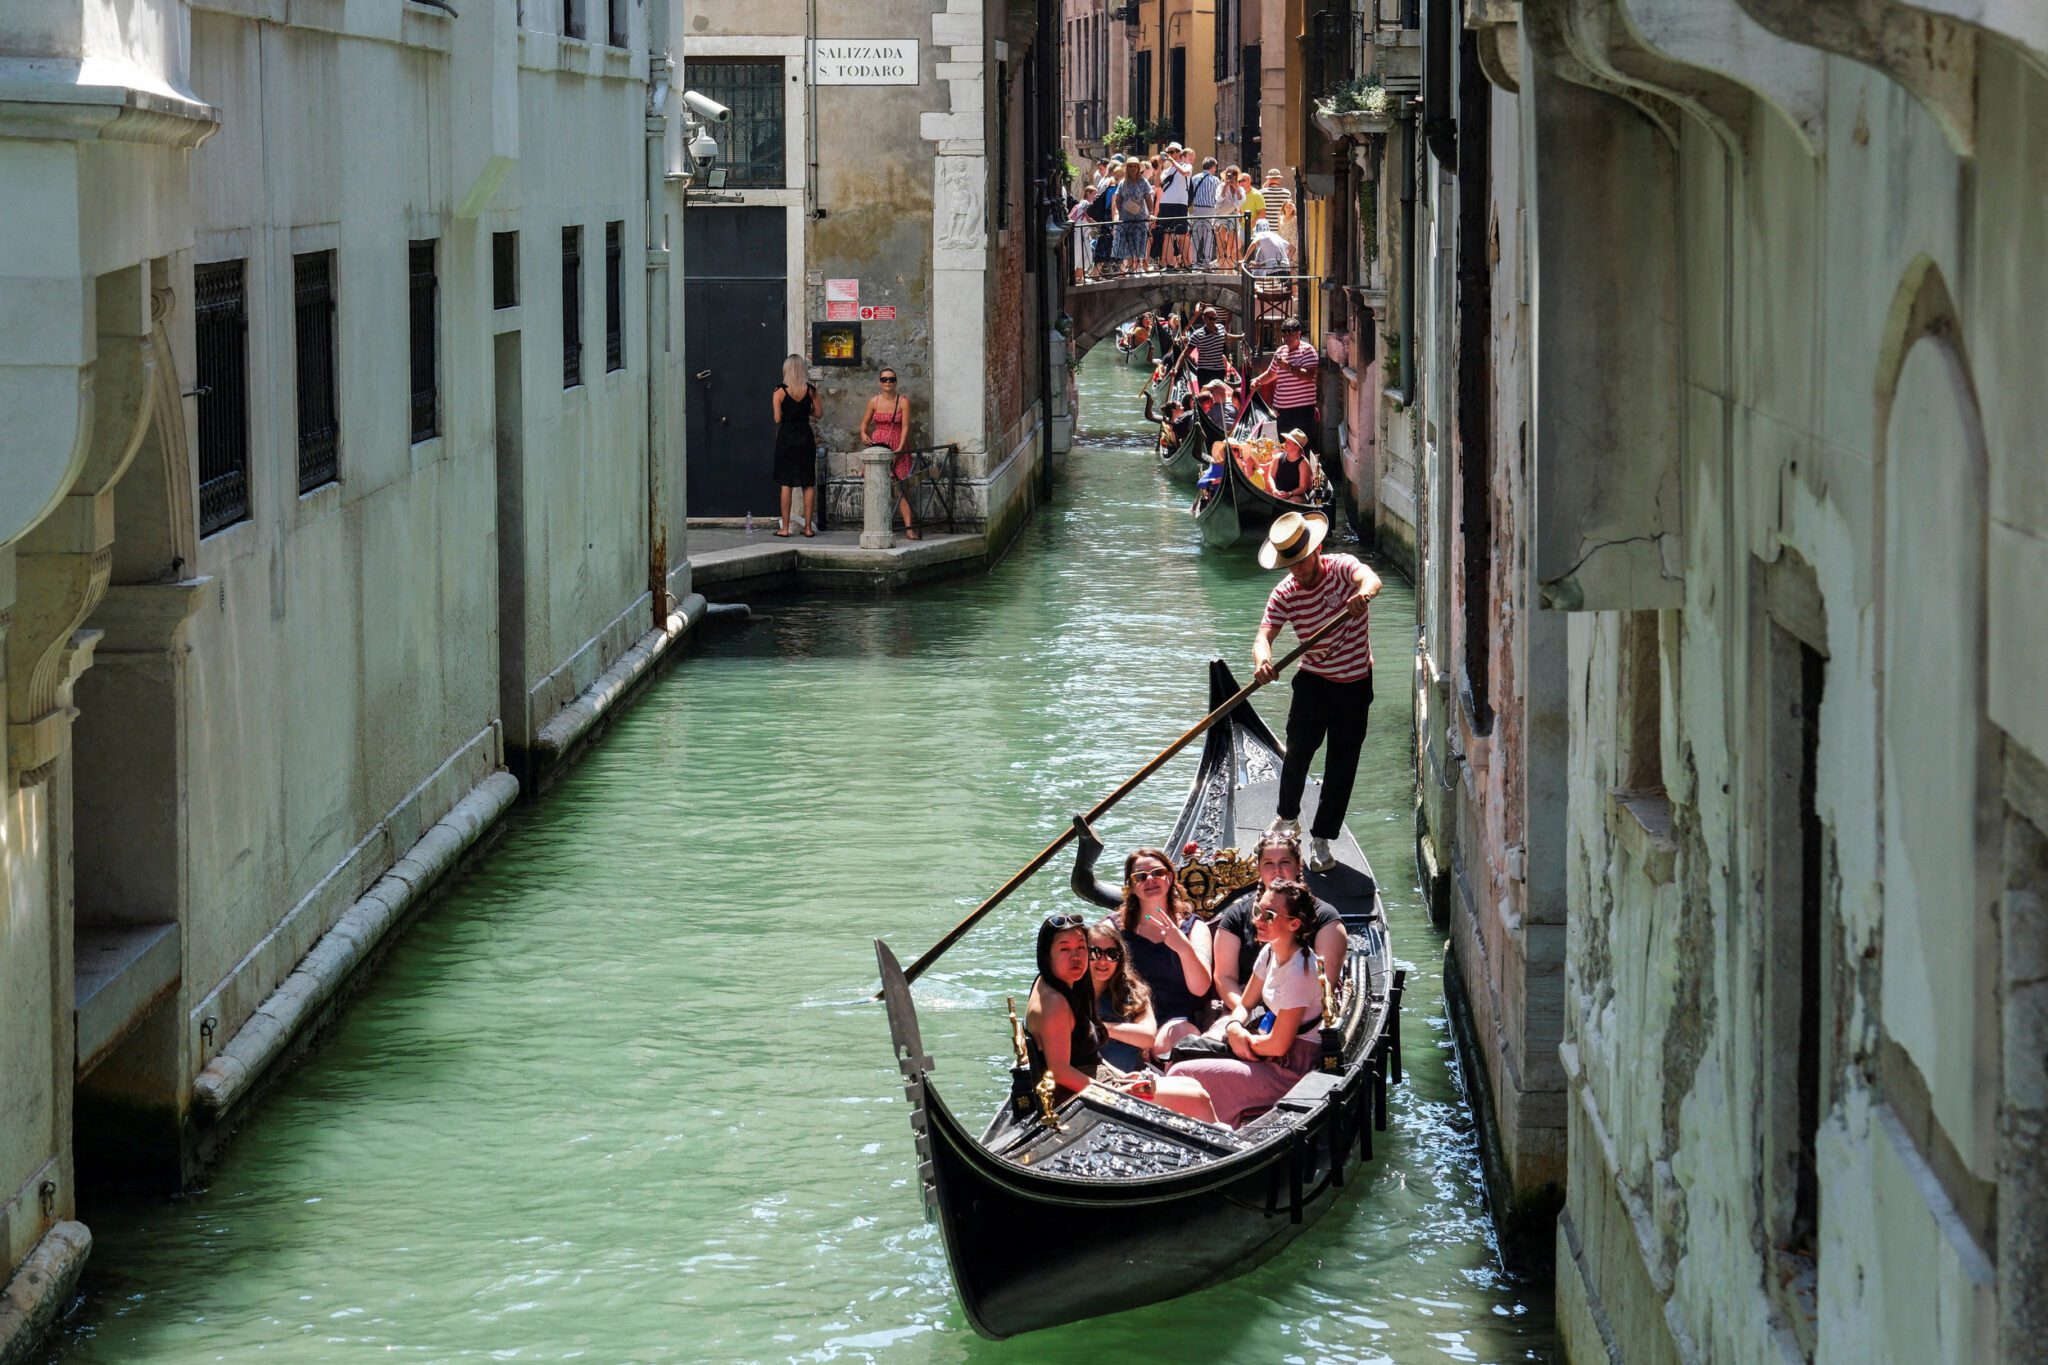 Venice, known for its canals and cultural sites, has been struggling with mass tourism for years.